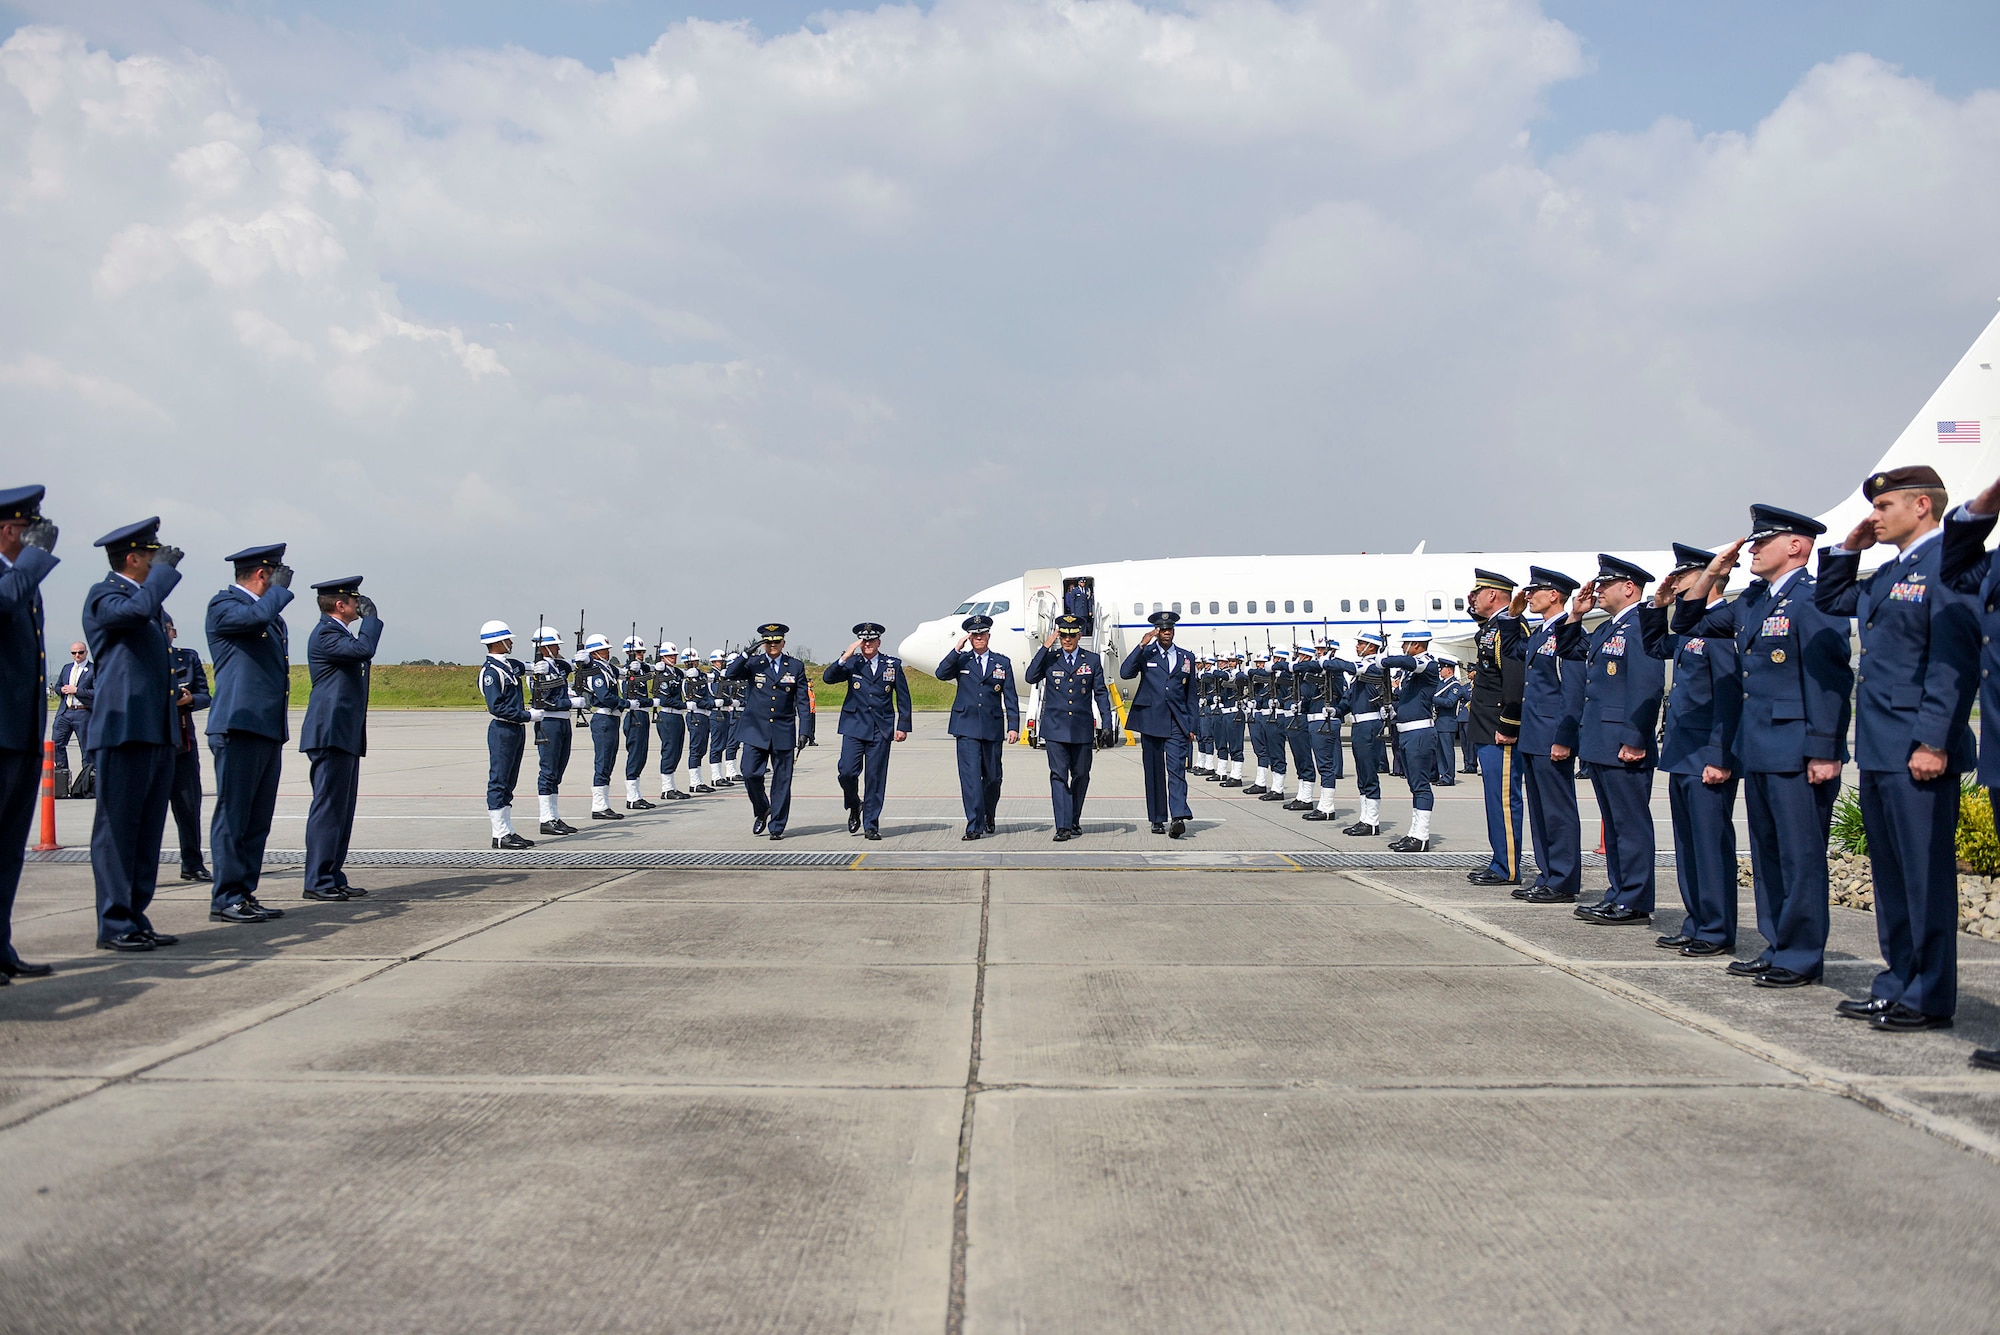 Air Force Chief of Staff Gen. David L. Goldfein is welcomed to Bogota, Colombia, Nov. 14, 2018, by members of the U.S. and Colombian air forces. Regional partnerships like that of the U.S. and Colombia reflect an enduring promise of a cooperative, prosperous and secure hemisphere. (U.S. Air Force photo by Tech Sgt. Anthony Nelson Jr.)